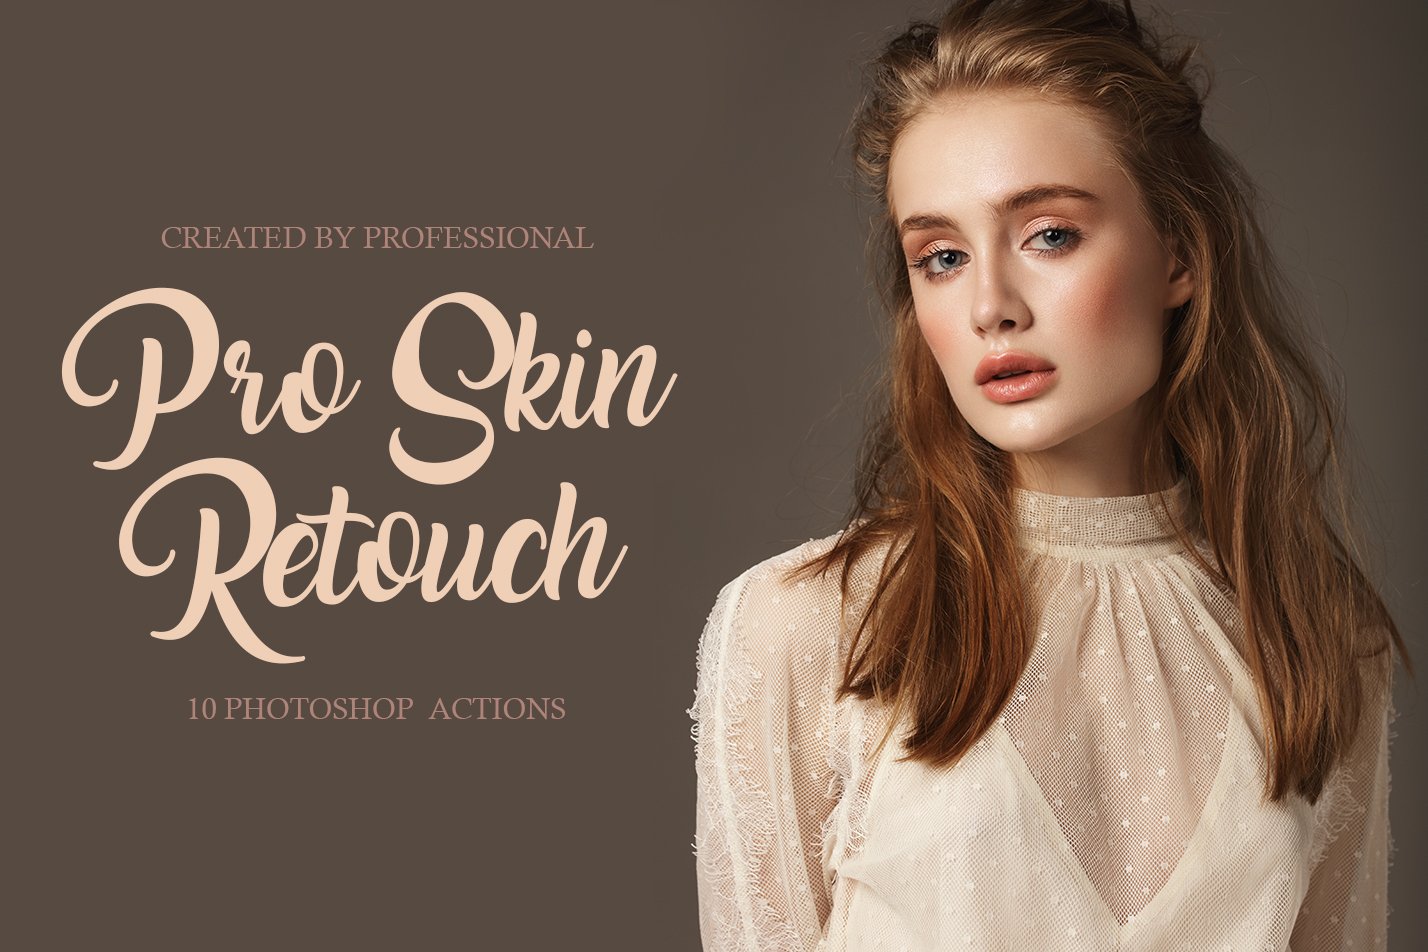 Pro Skin Retouch Photoshop Actionscover image.